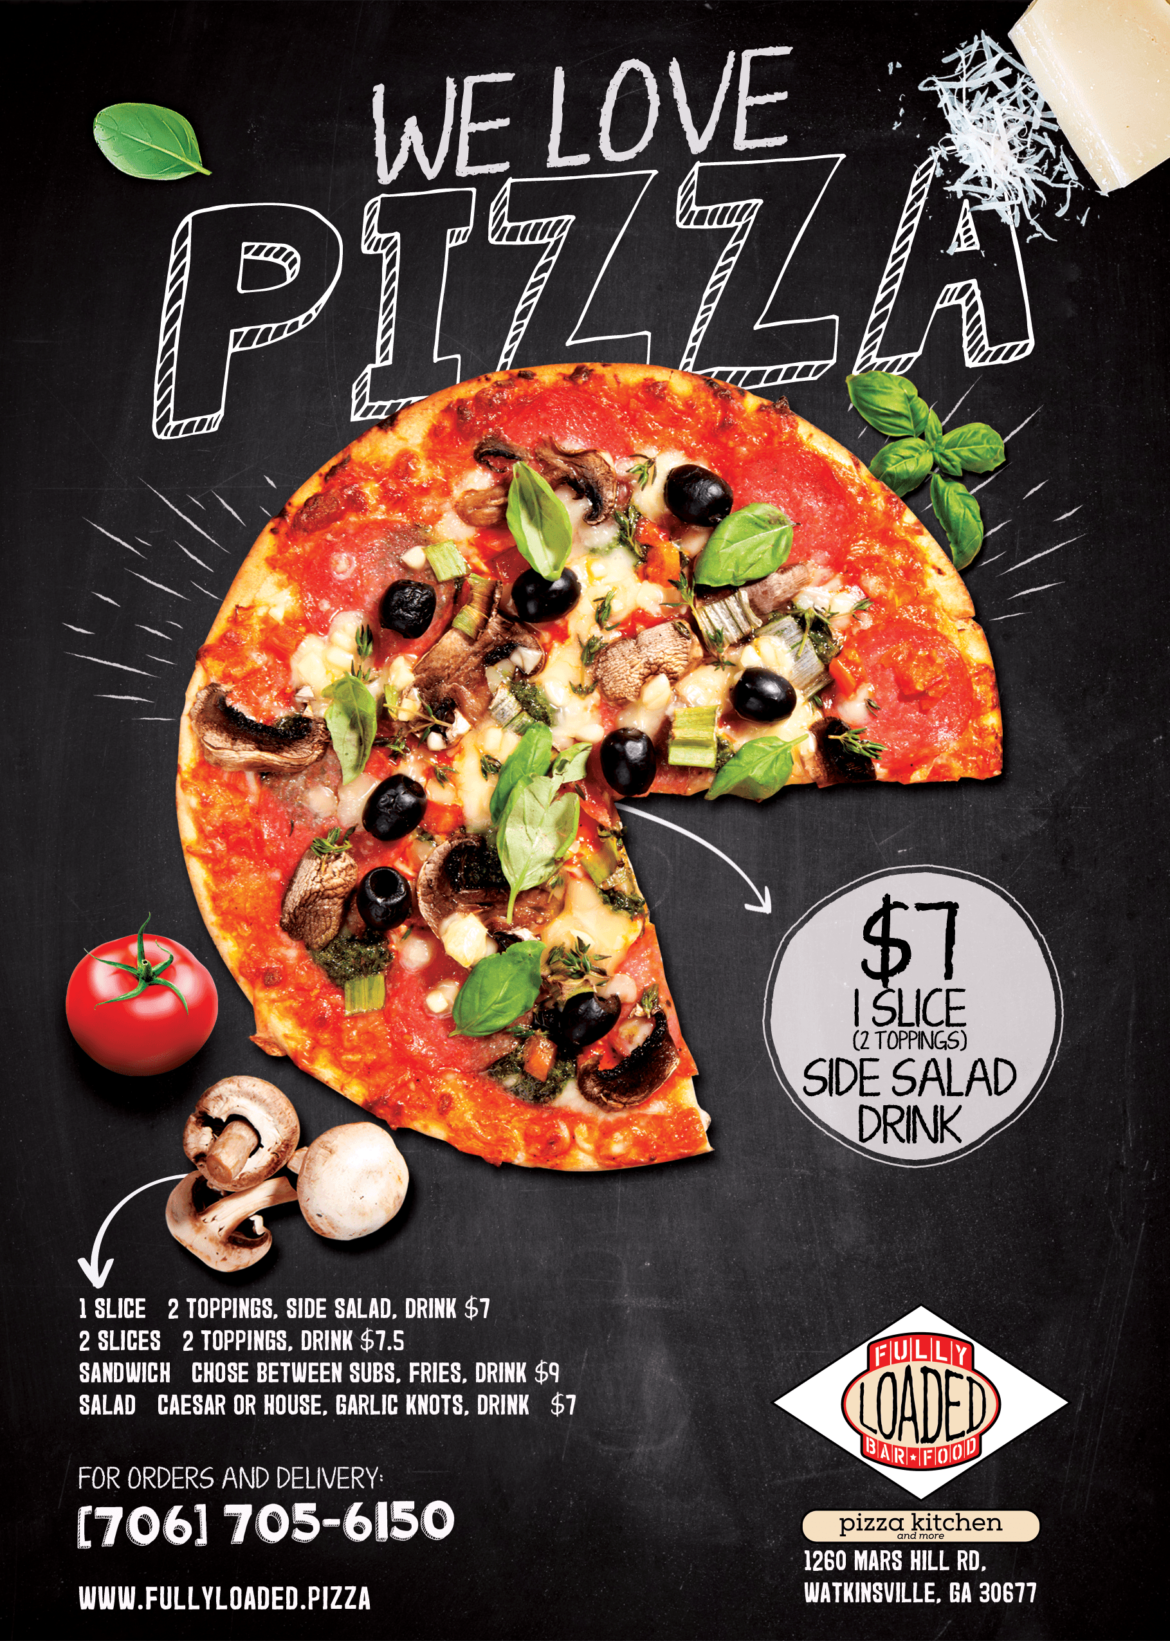 Fully Loaded Pizza Kitchen Lunch Specials Flyer Jpg Fully Loaded Pizza